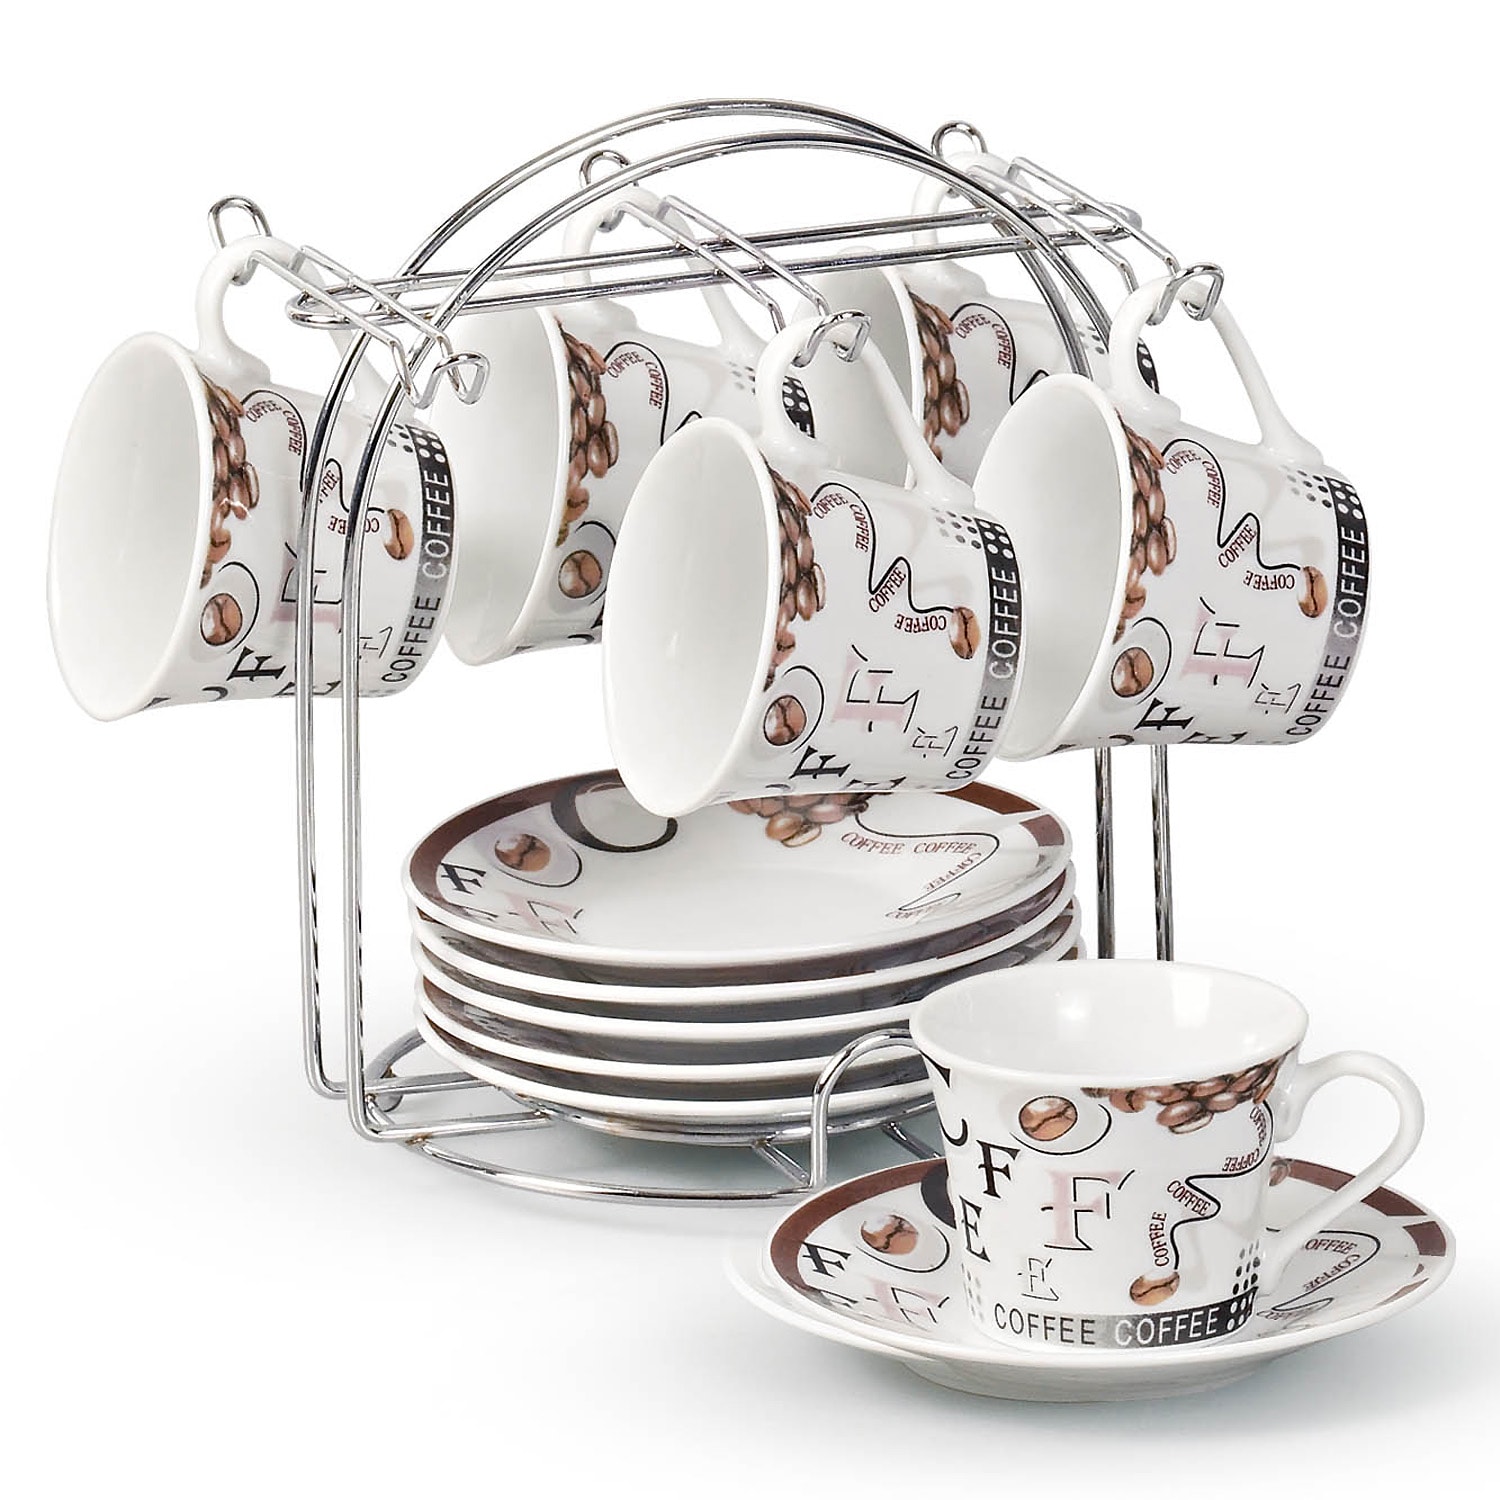 Coffee and Bean 12-piece Espresso Set with Stand